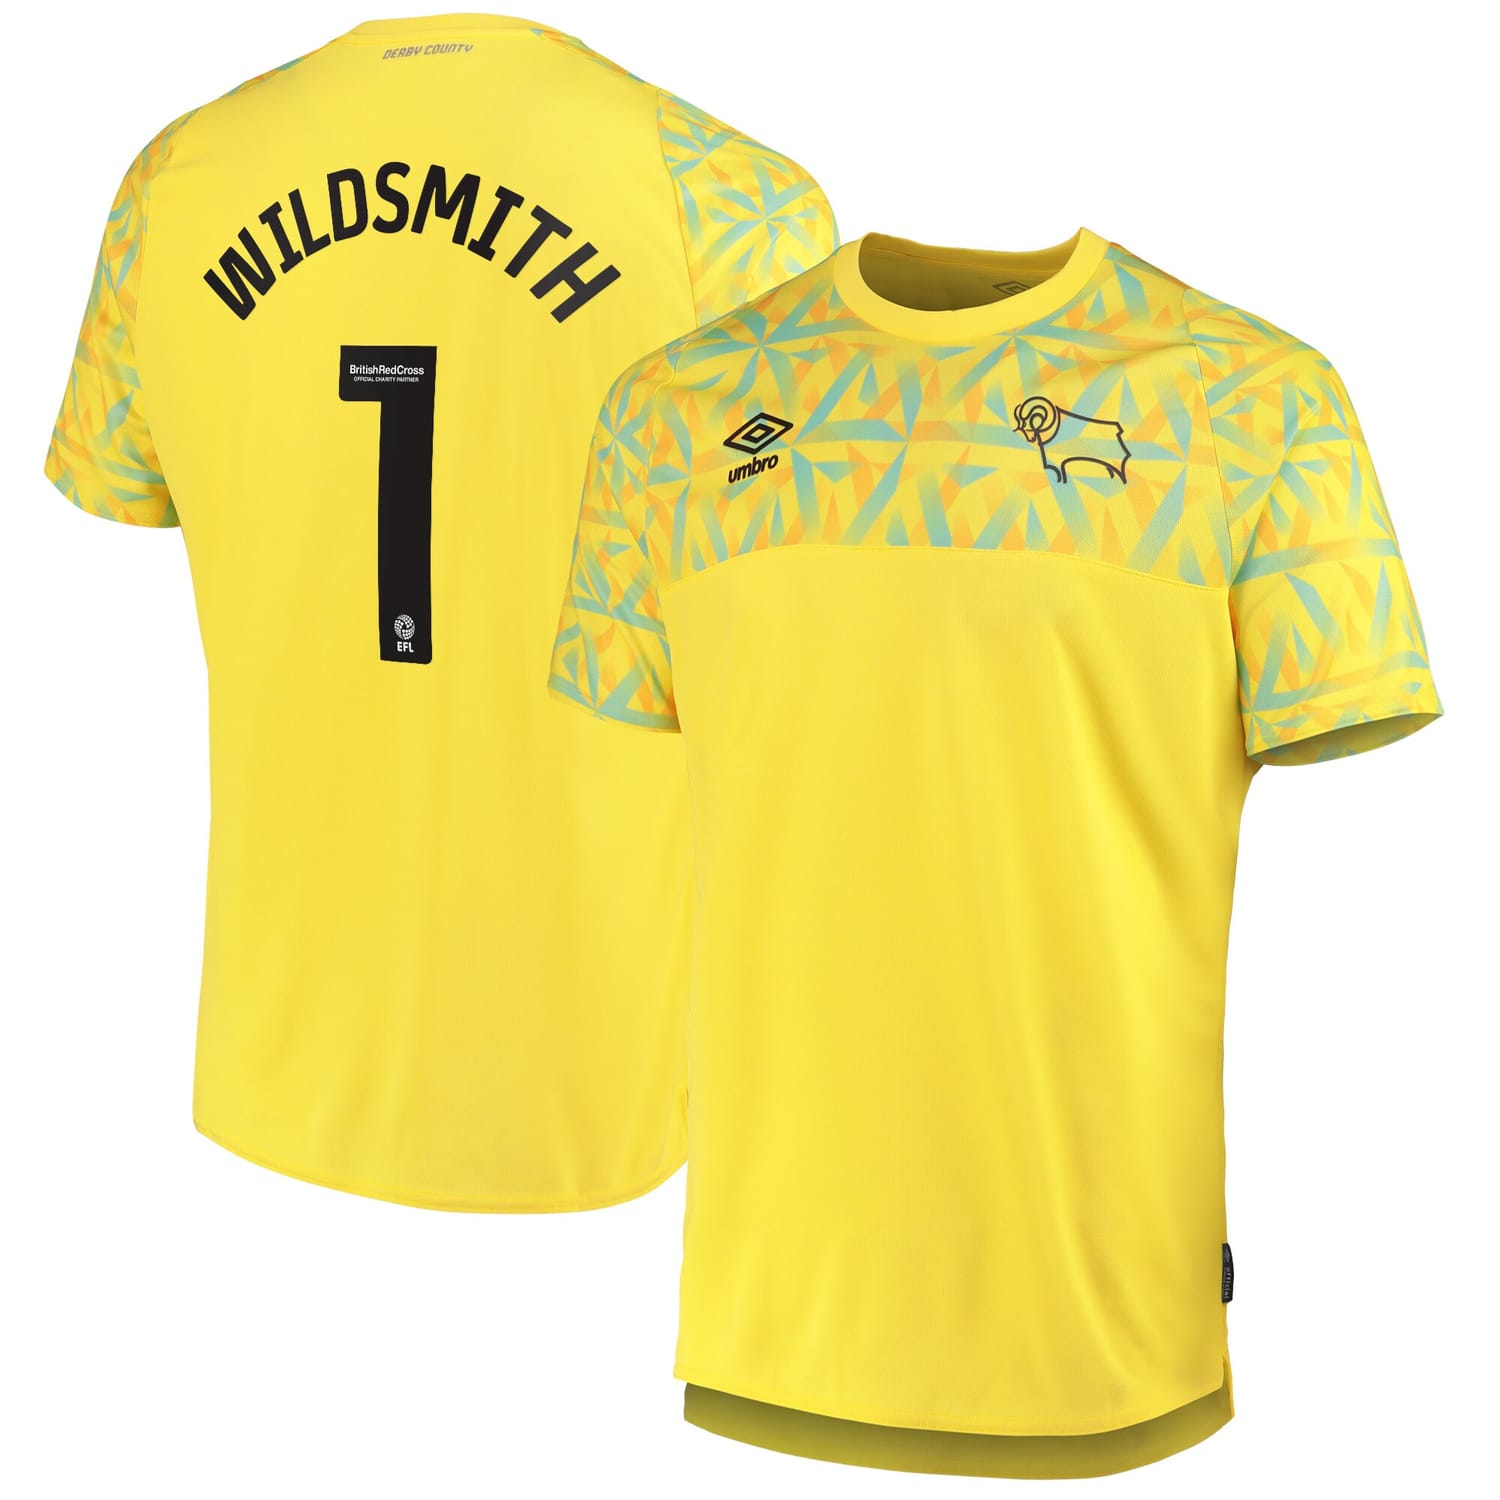 EFL League One Derby County Away Goalkeeper Jersey Shirt 2022-23 player Wildsmith 1 printing for Men